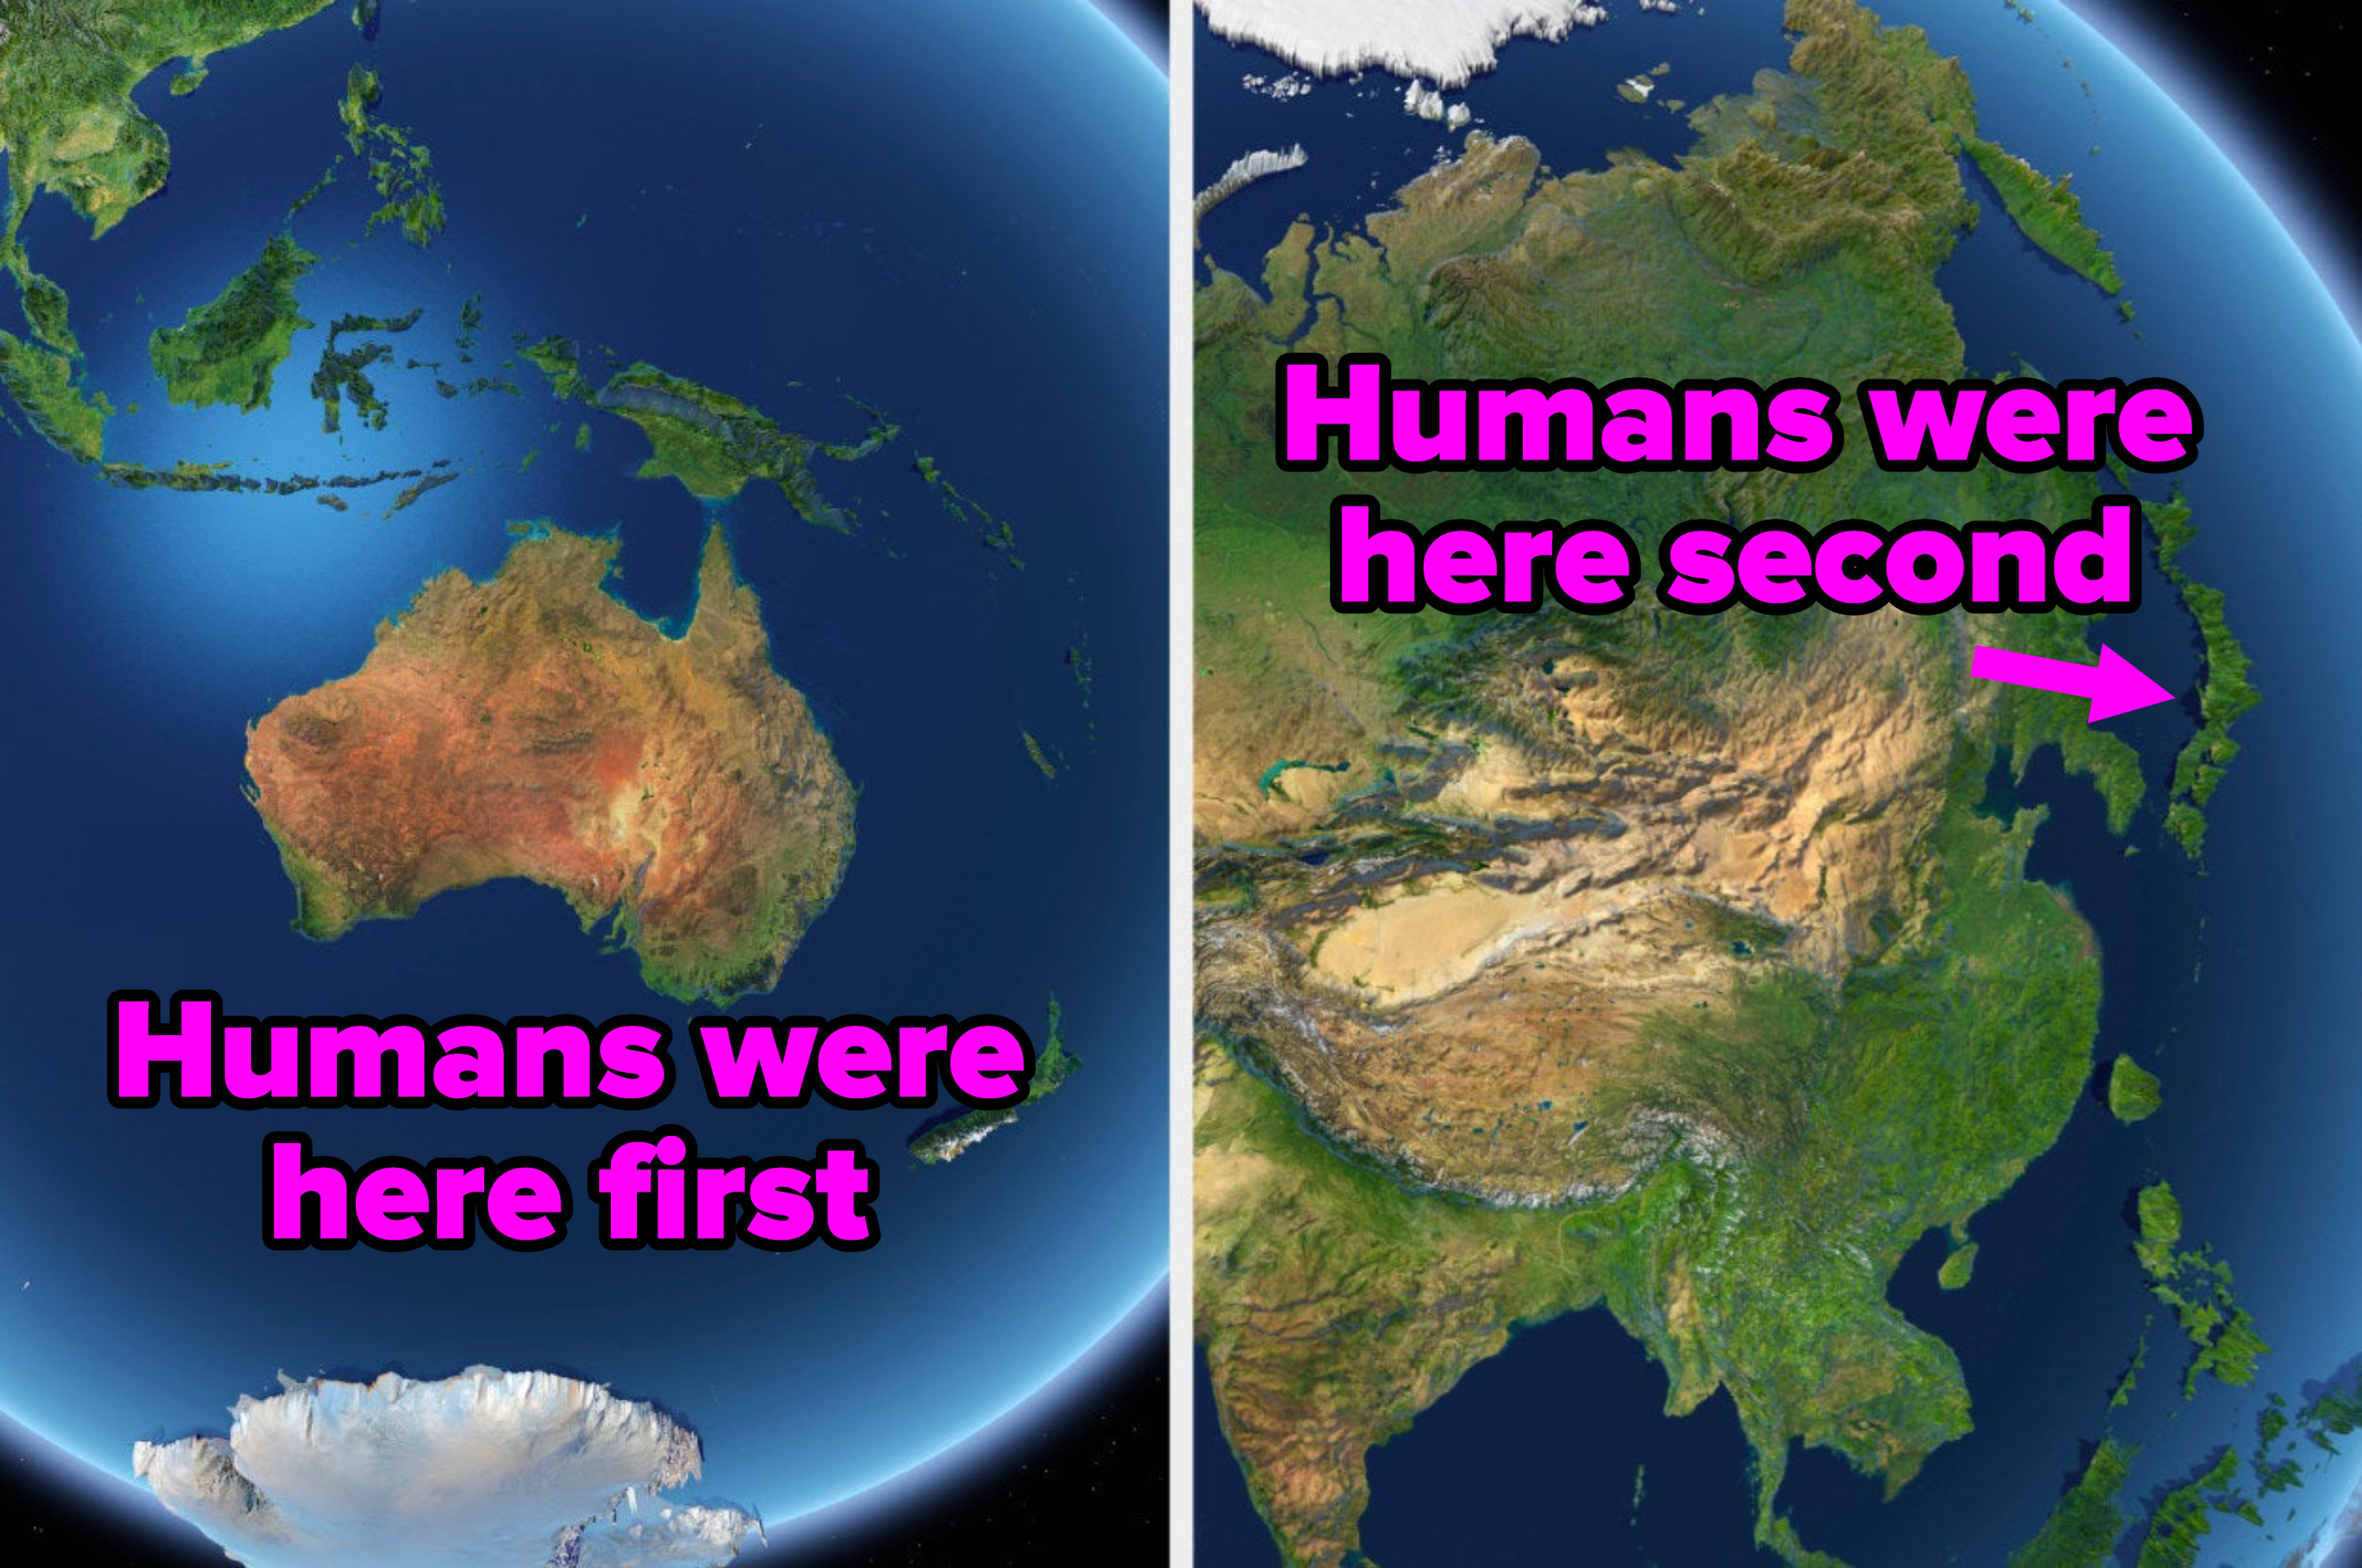 &quot;Humans were here first&quot; written over Australia on a globe and &quot;Humans were here second&quot; written over Japan on a globe